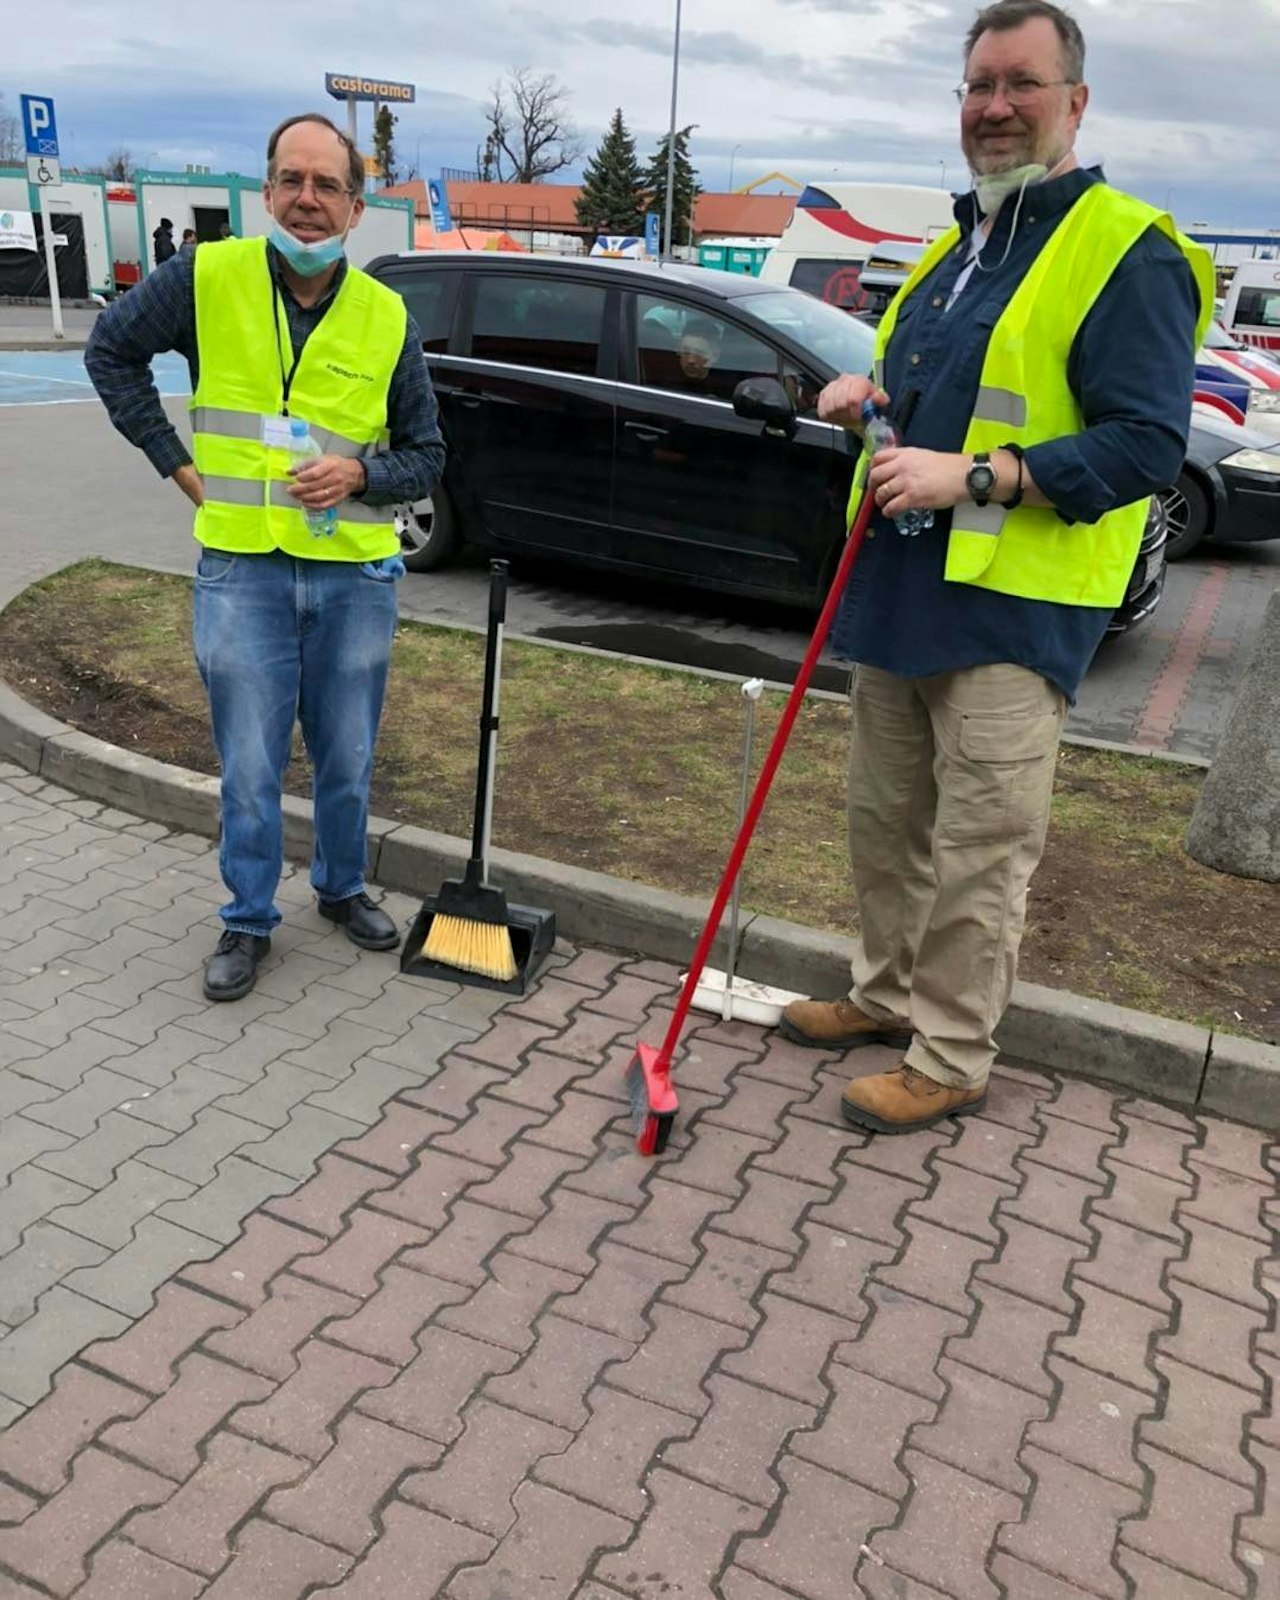 Mike McDevitt, left, works alongside another volunteer at the Tesco Refugee Center. McDevitt said spending 10 days in service of Ukrainian refugees reminded him of the value of compassion and of being present to others.